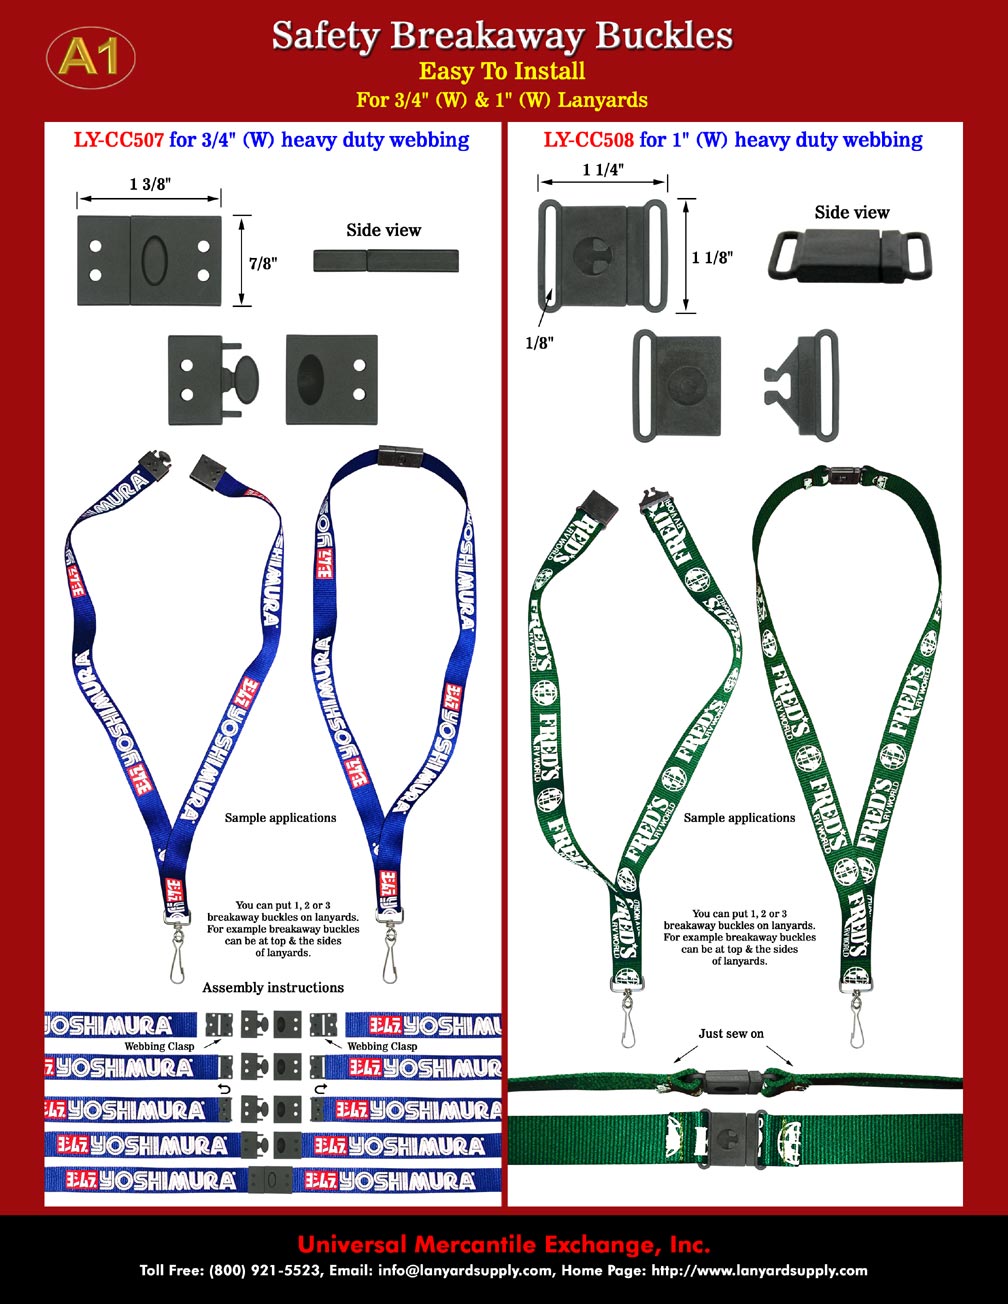 Safety ID Lanyards Hardware Accessories: Industrial Safety Breakaway Plastic Buckles or Plastic Lanyards Connectors